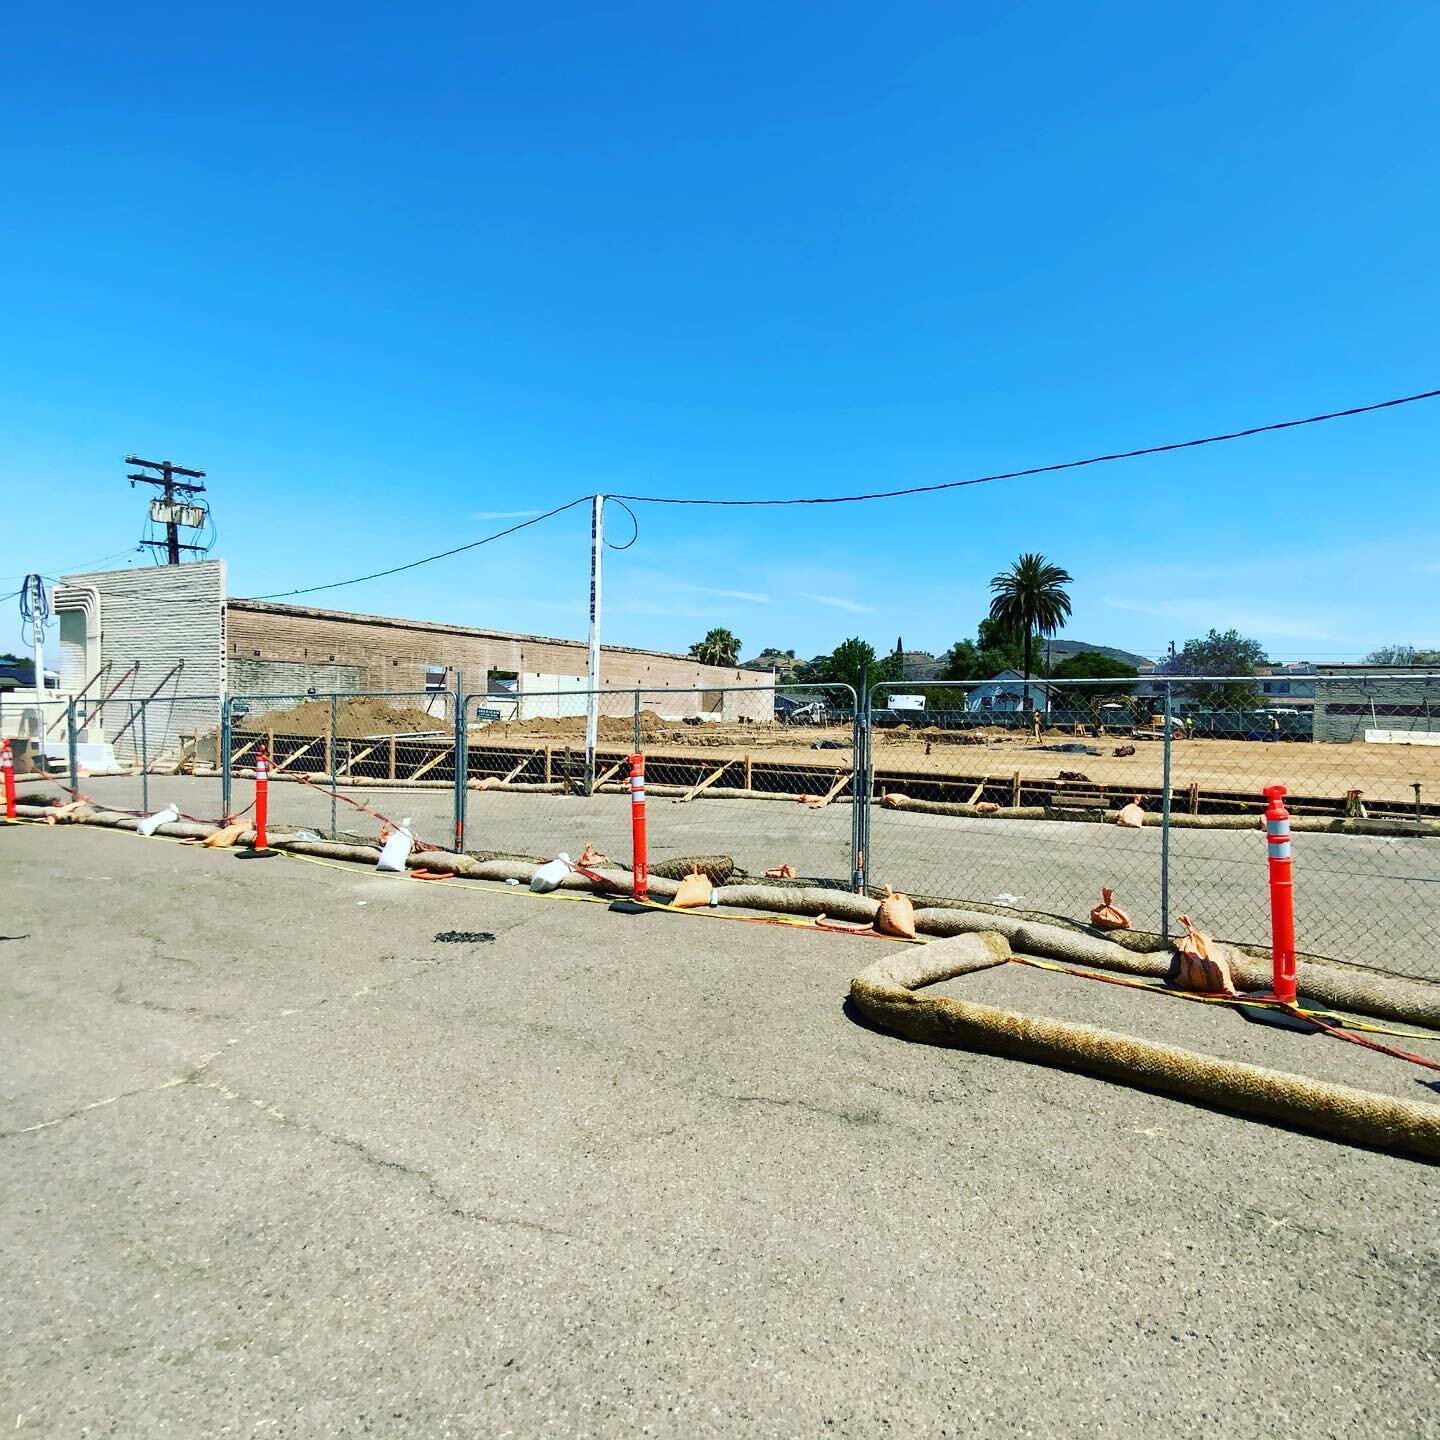 Underground has started on Awaken church. This project is located in the old Vons in El Cajon and has a duration of 1 year! #electricians #construction #alpineelectrifies